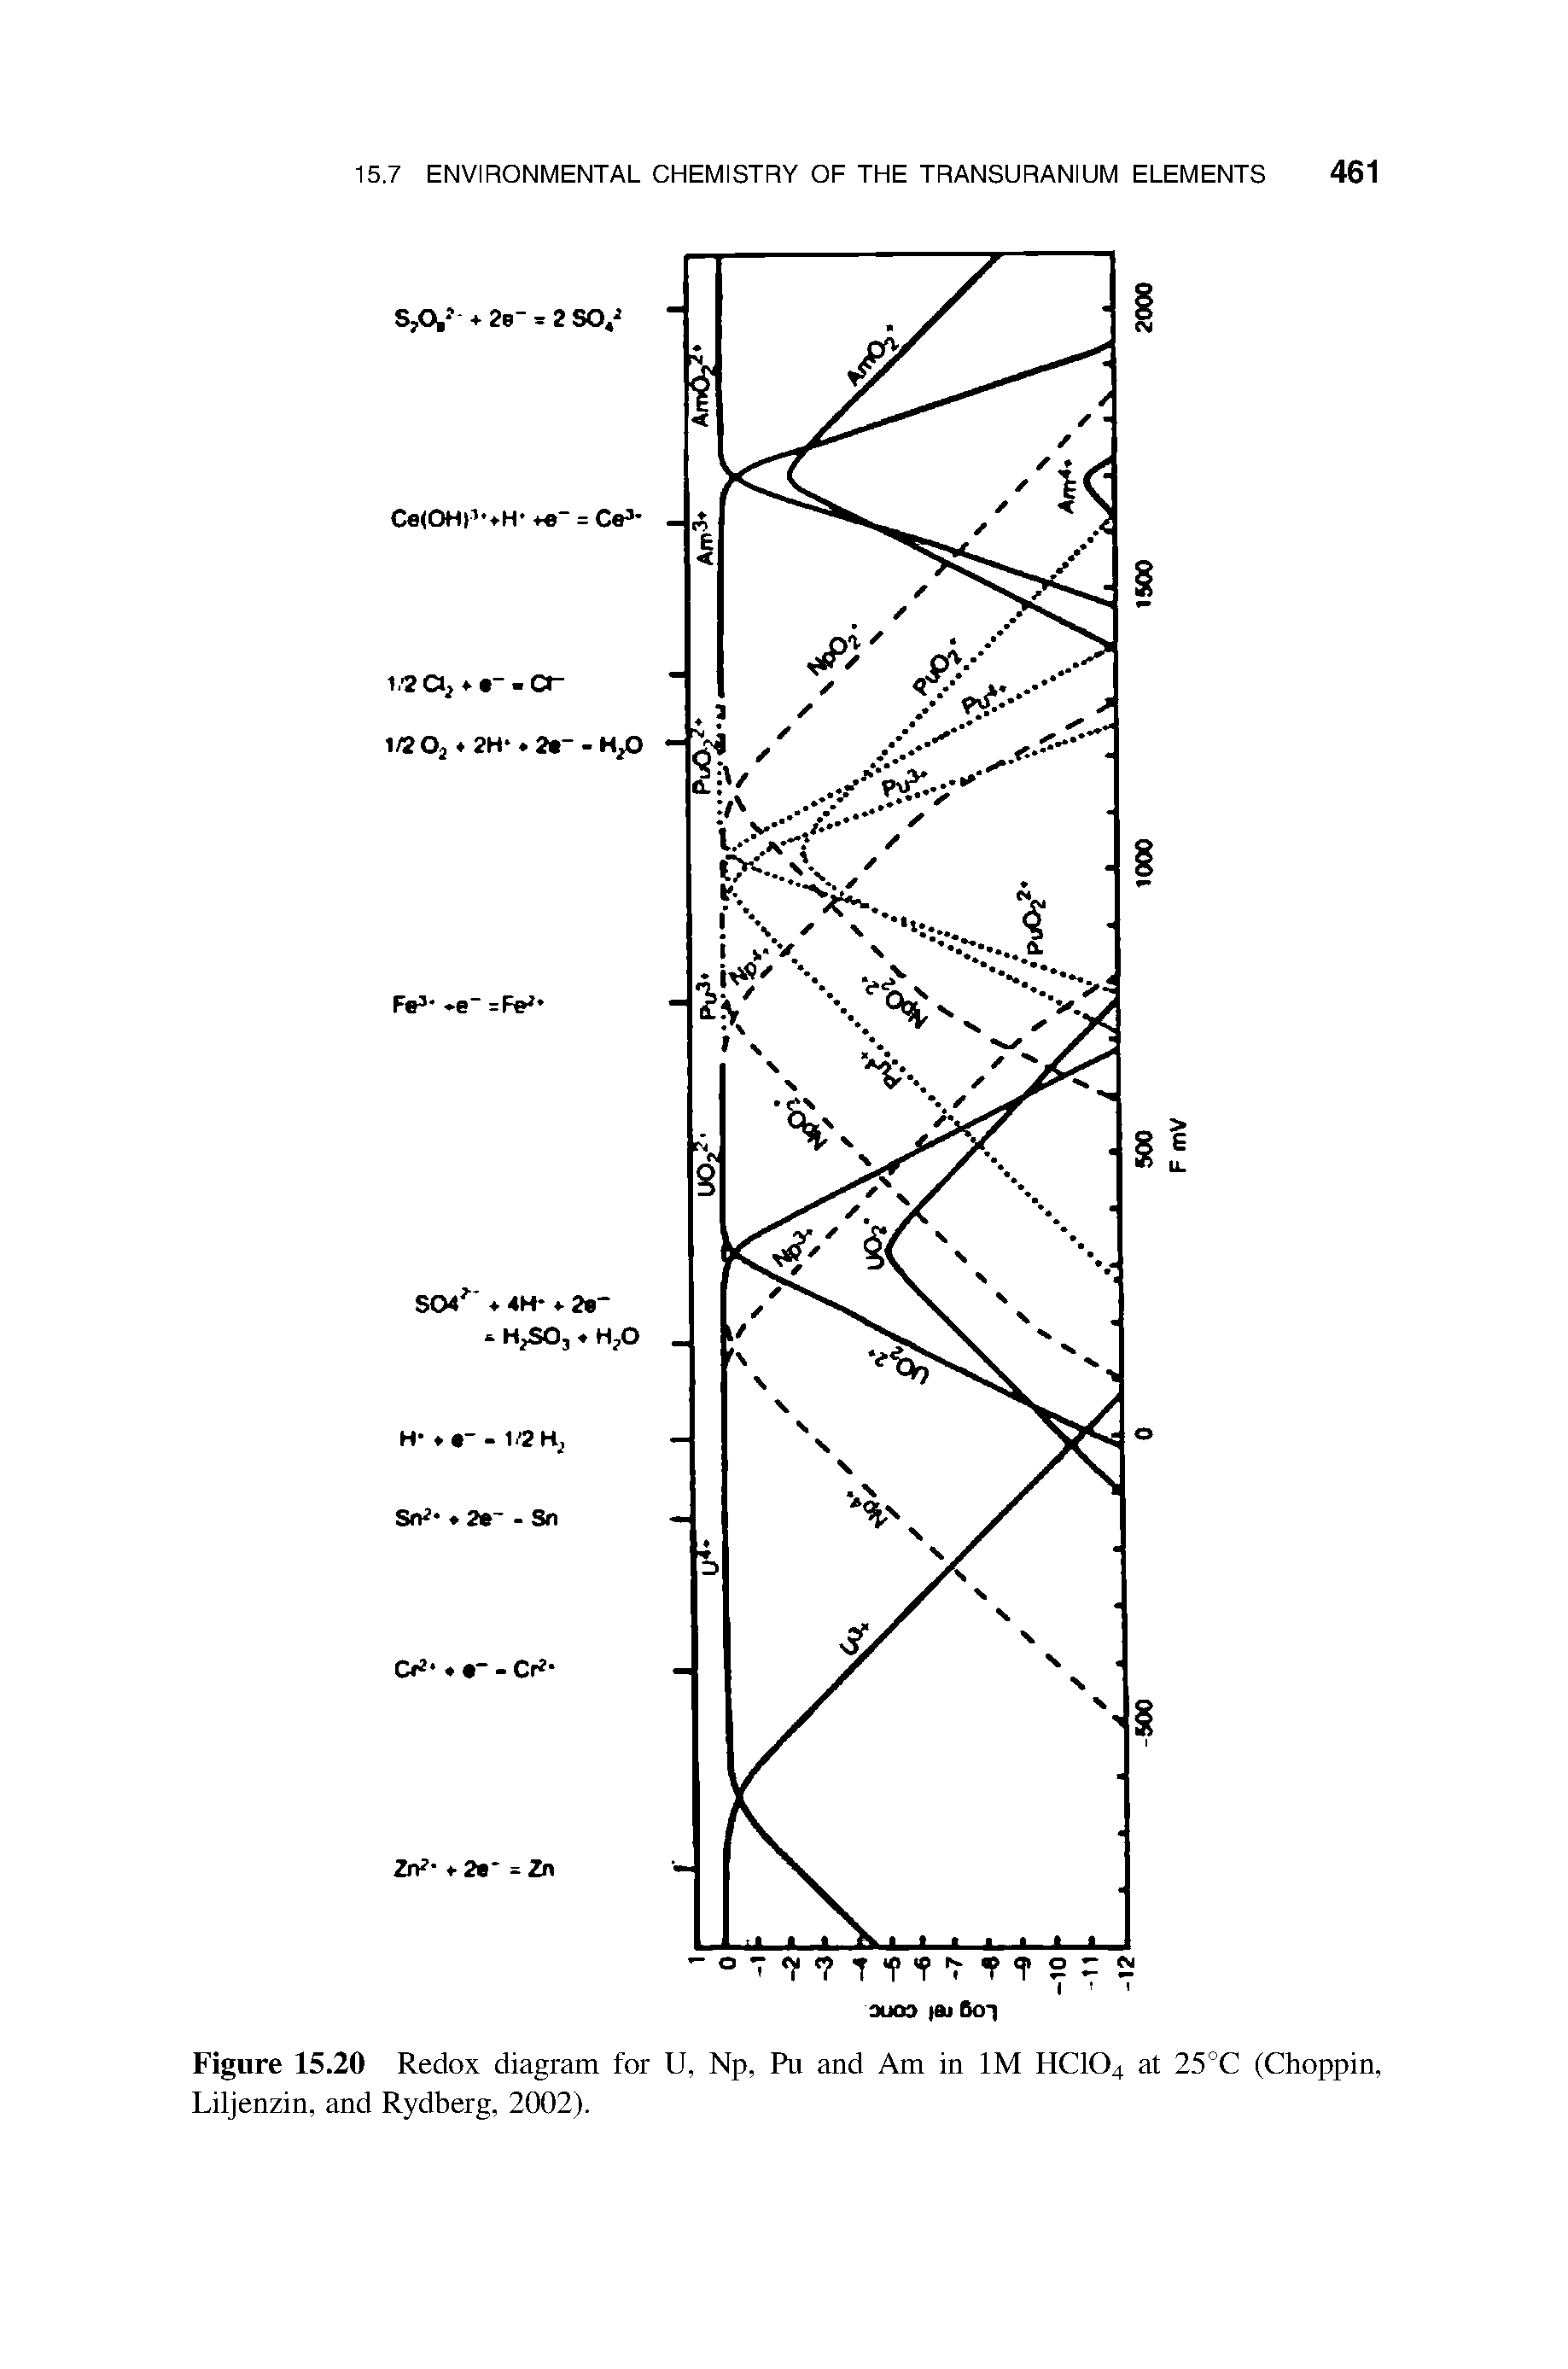 Figure 15.20 Redox diagram for U, Np, Pu and Am in 1M HC104 at 25°C (Choppin, Liljenzin, and Rydberg, 2002).